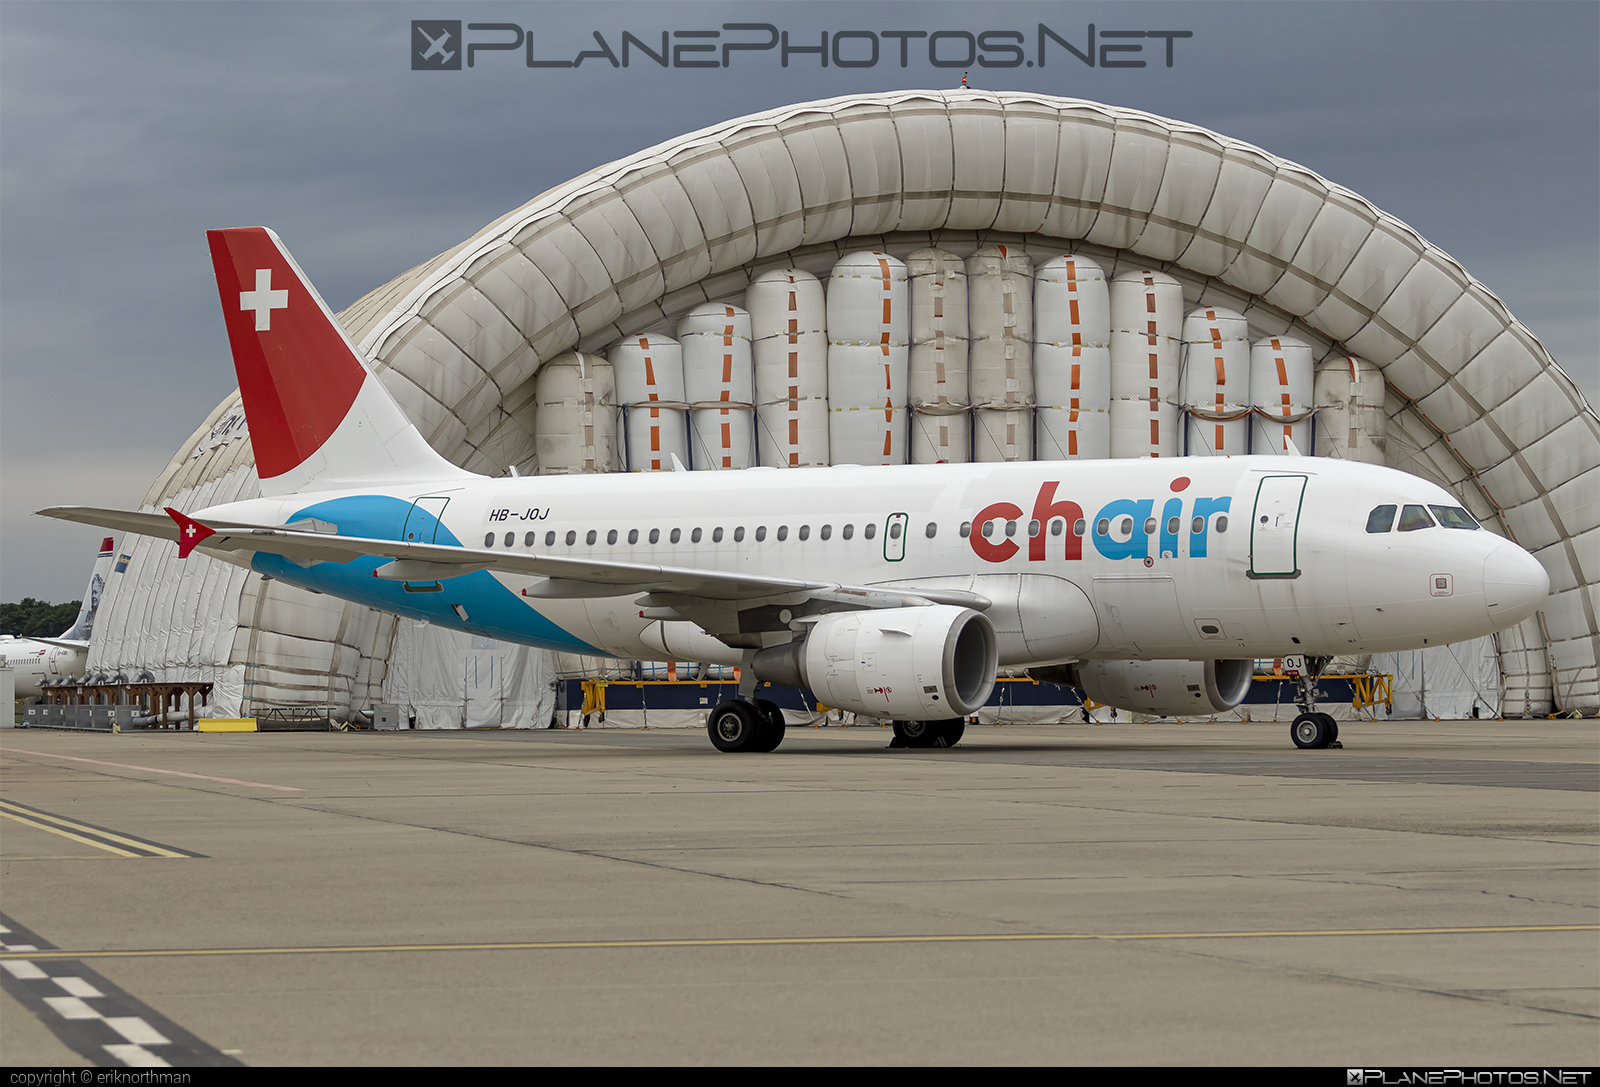 Airbus A319-112 - HB-JOJ operated by Chair Airlines #a319 #a320family #airbus #airbus319 #chairairlines